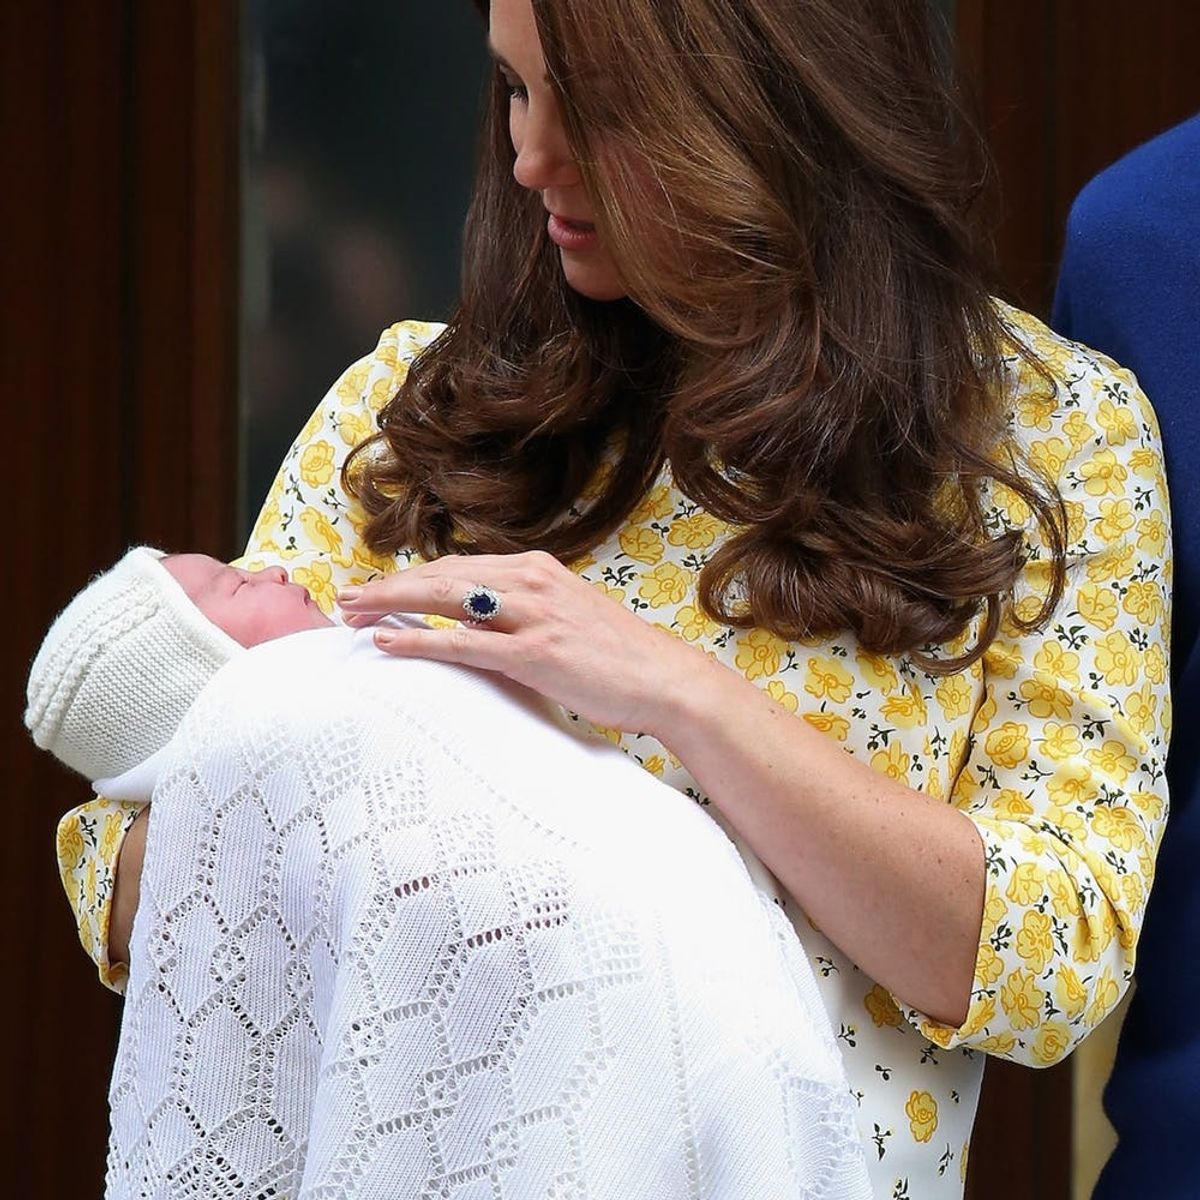 8 DIY Baby Blankets That Are Just as Cute as Kate’s